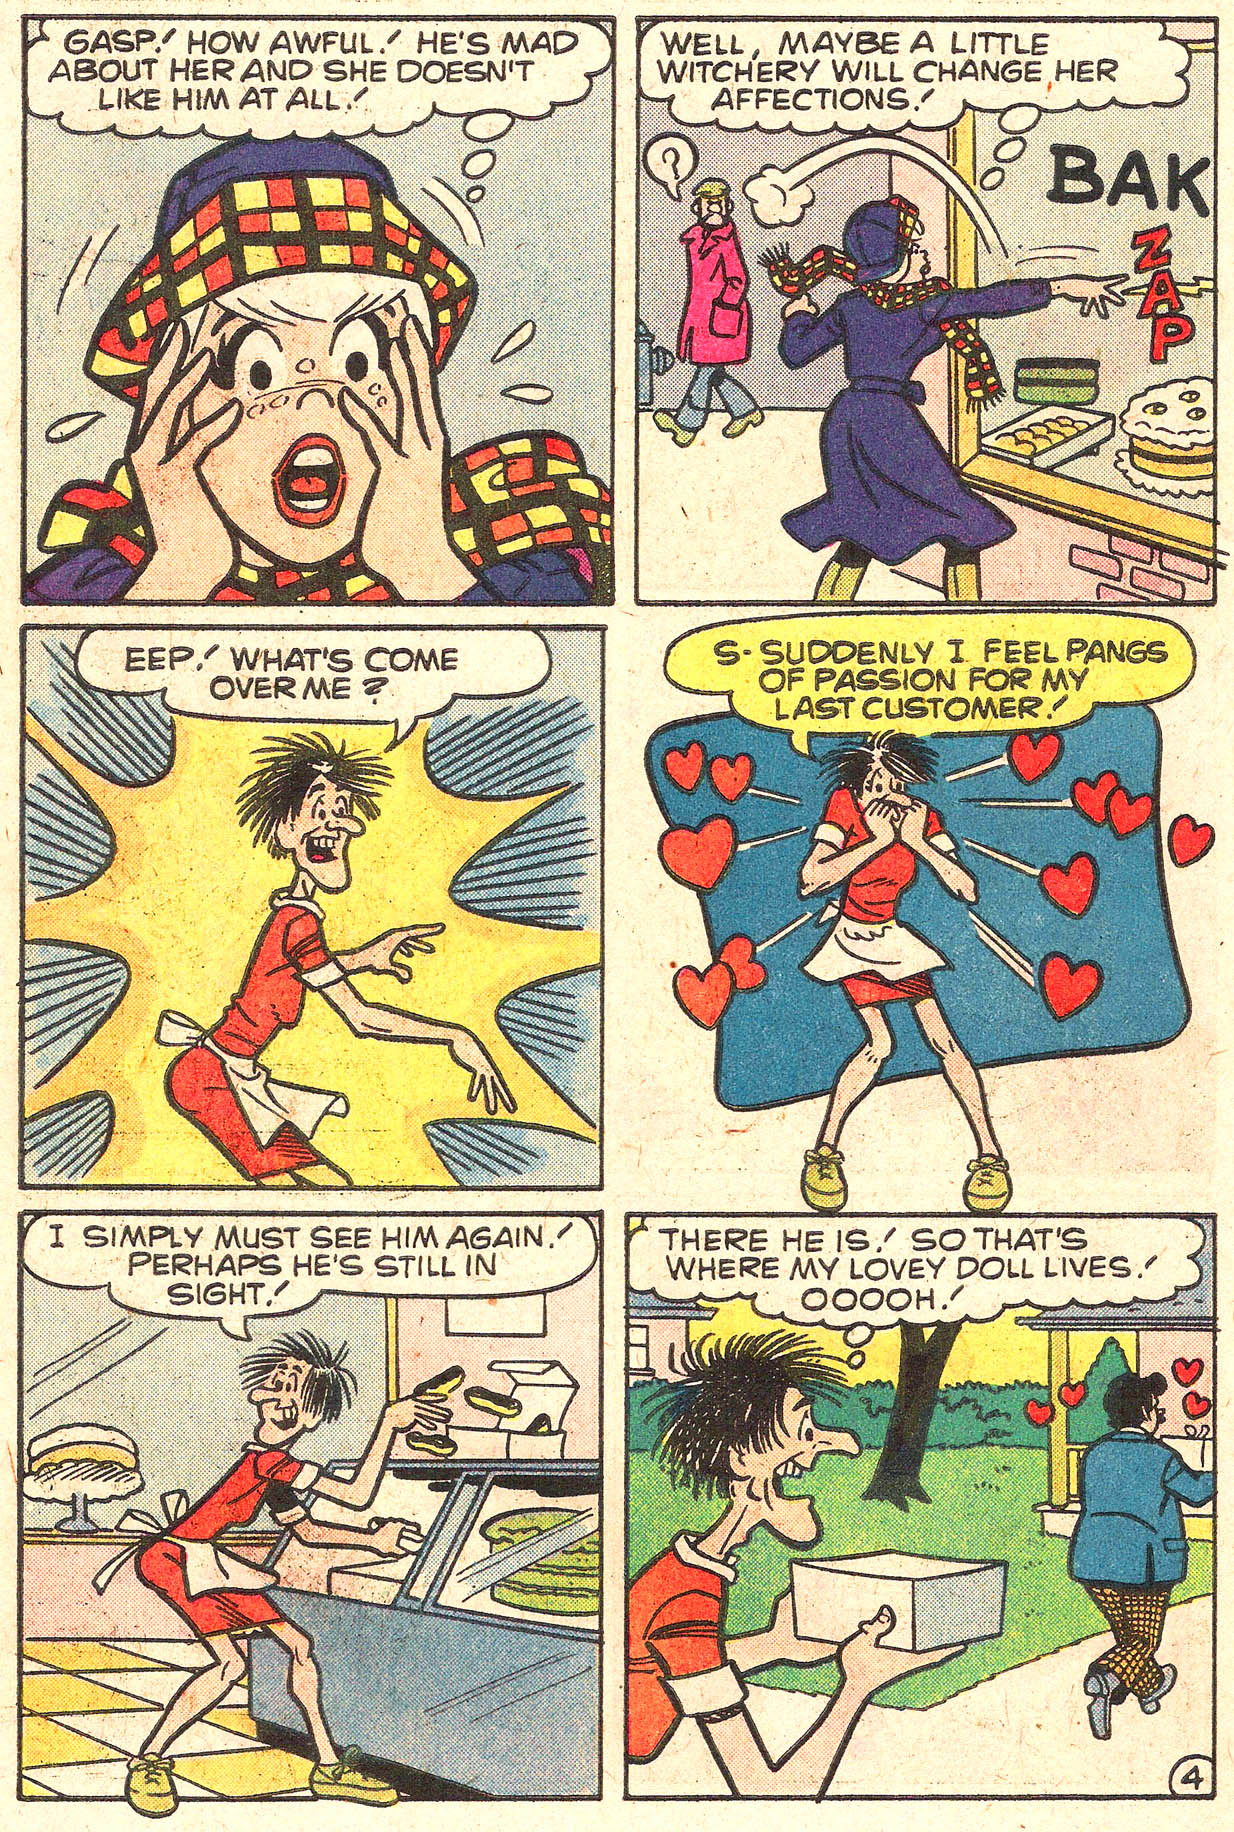 Sabrina The Teenage Witch (1971) Issue #45 #45 - English 6